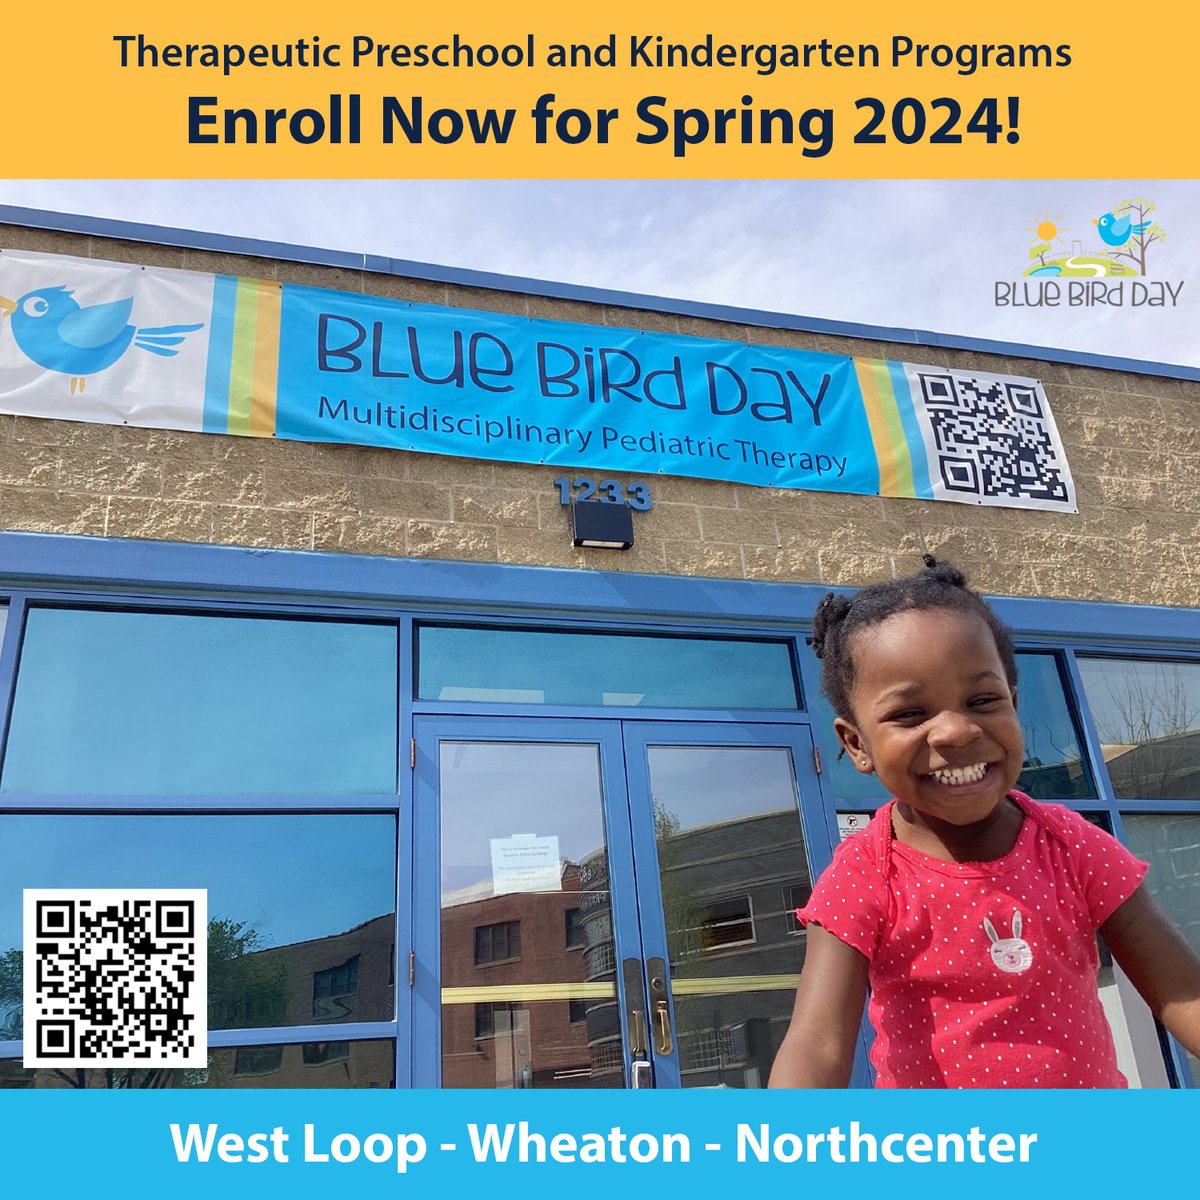 Blue Bird Day's therapeutic programs set your child up for success at school and beyond. Open sports are limited, so register today! bluebirddayprogram.com/contact/
#pediatrictherapy #therapyprogram #therapyclinic #therapy #chicago #preschool #kindergarten #autism #autismspectrumdisorder